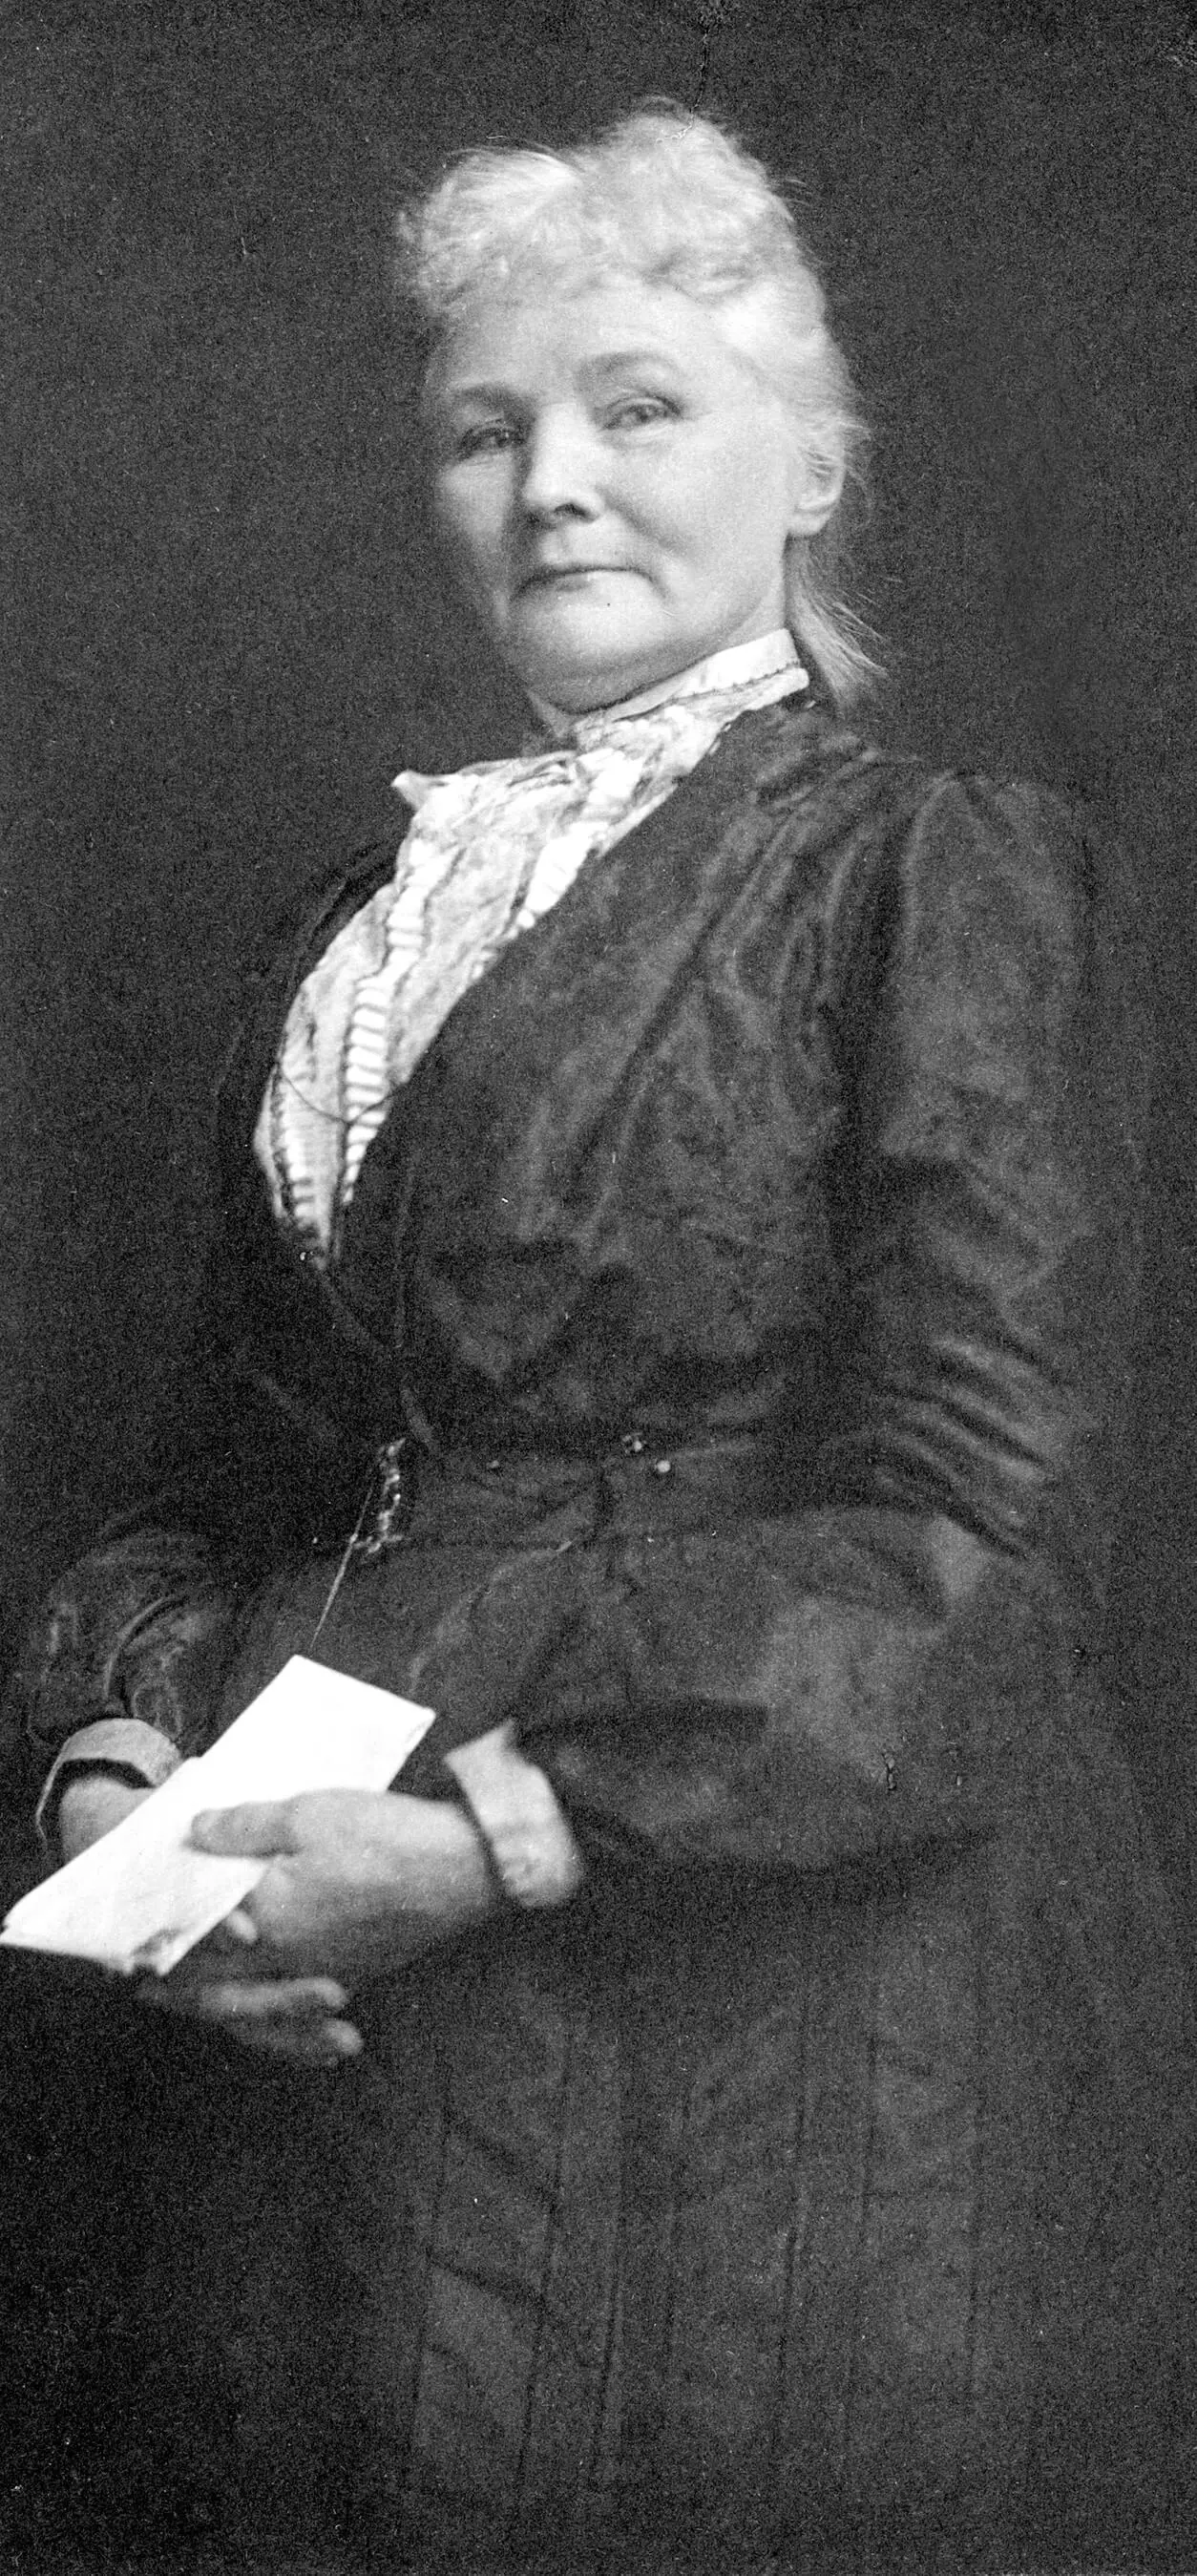 Black and white portrait of a white woman in a dress with white hair